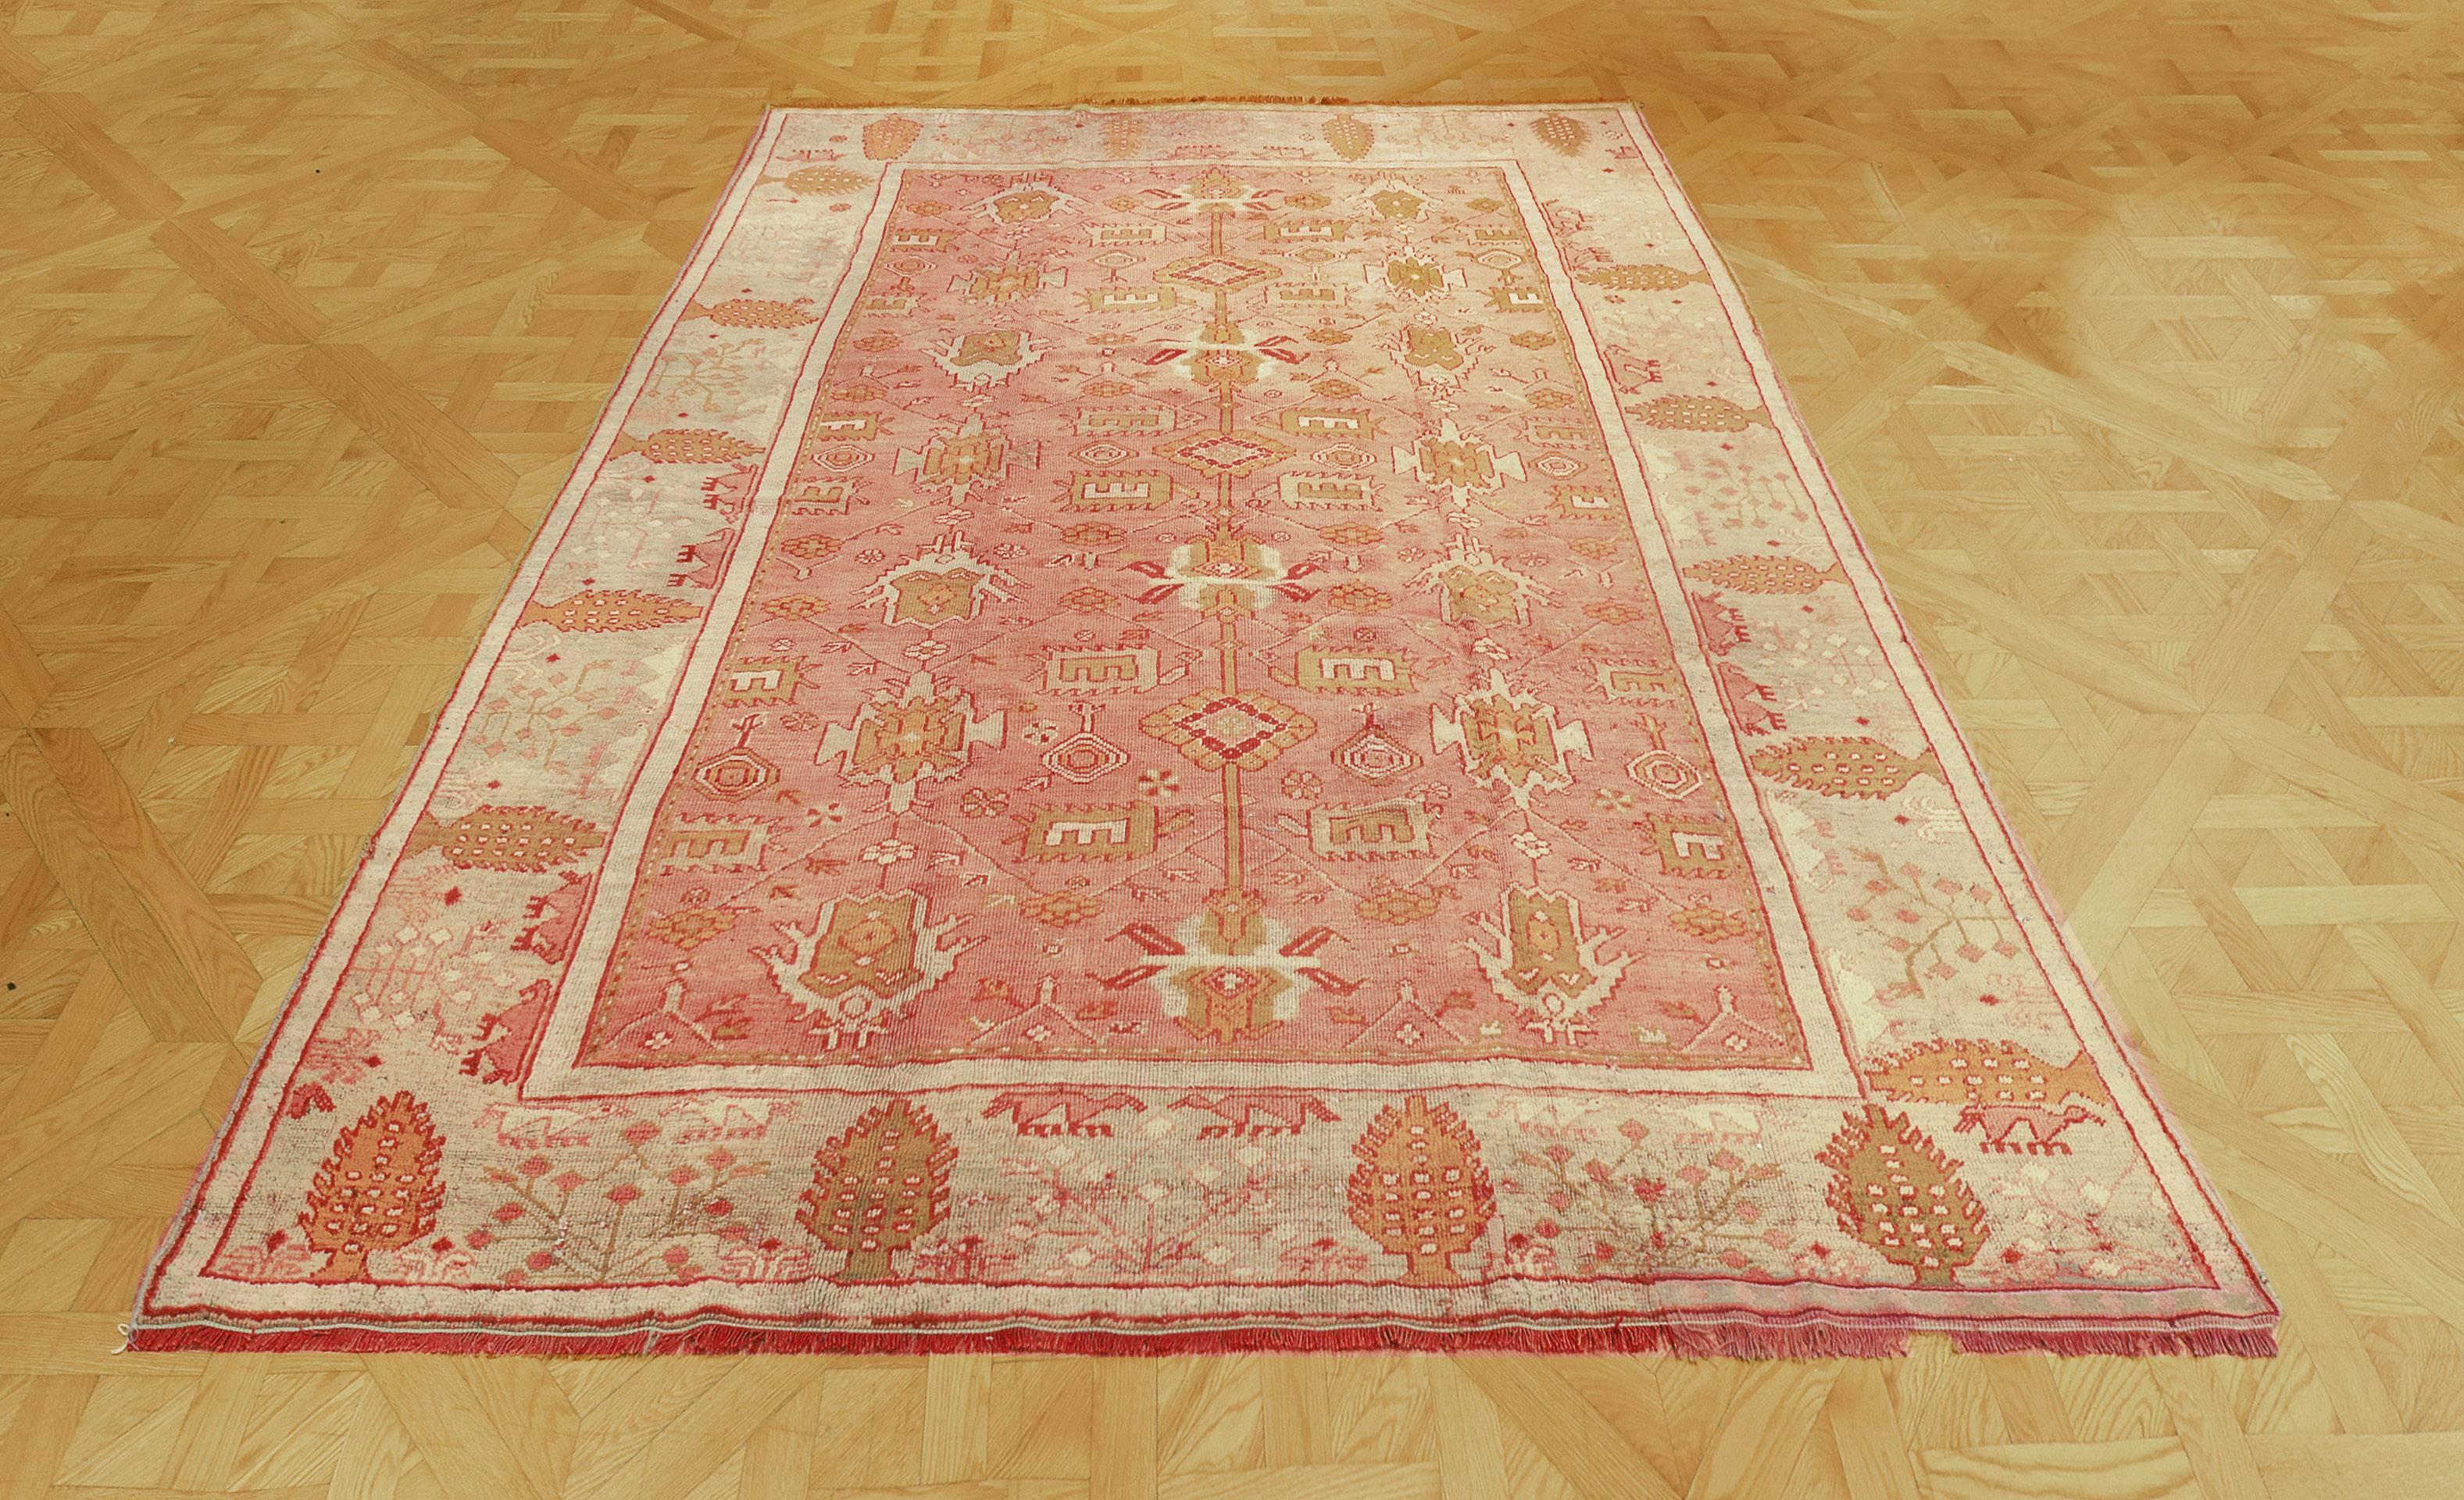 The terracotta red field with an overall angular shaded green and ivory palmette and floral vine, in an eau-de-nil border with stylised cypress trees alternating with a delicate floral sprays between plain ivory stripes.

Oushak (or Ushak) rugs